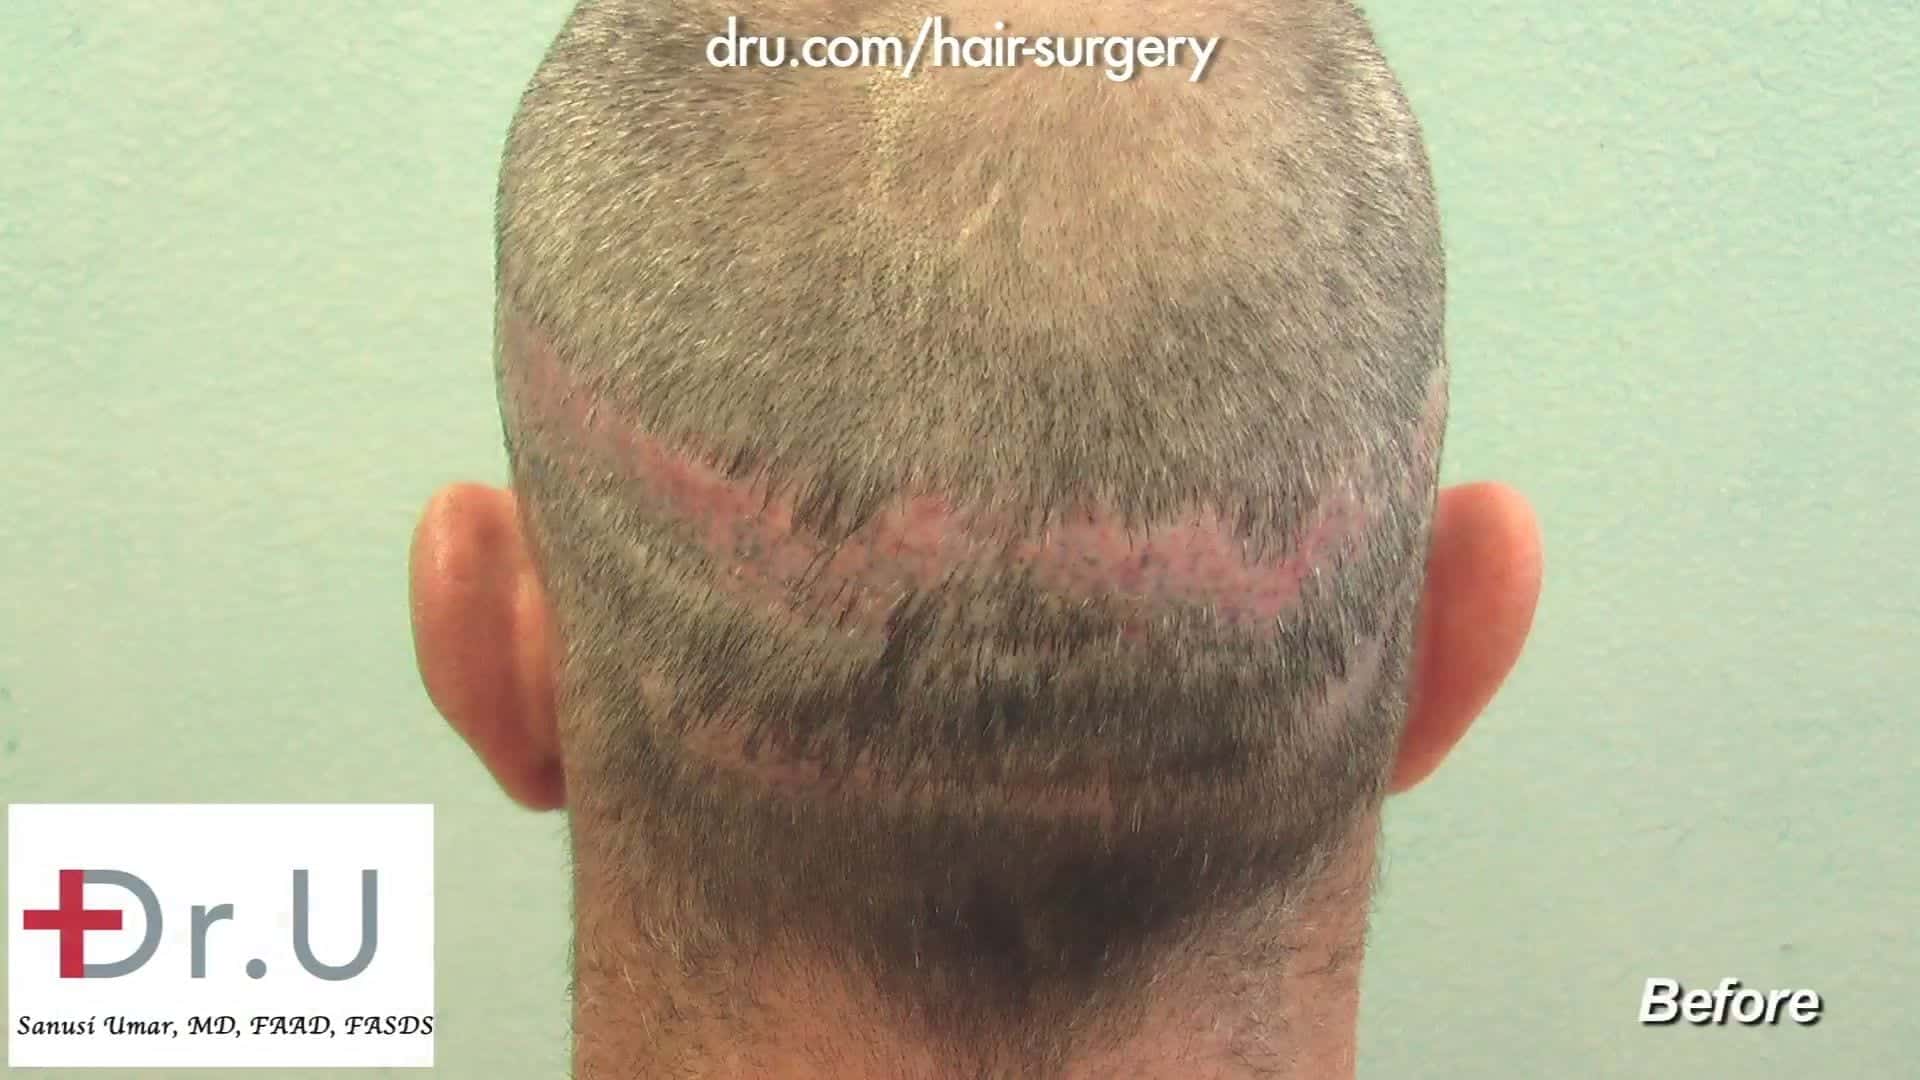 Strip Hair Transplant Procedures and Their Risks For Patients